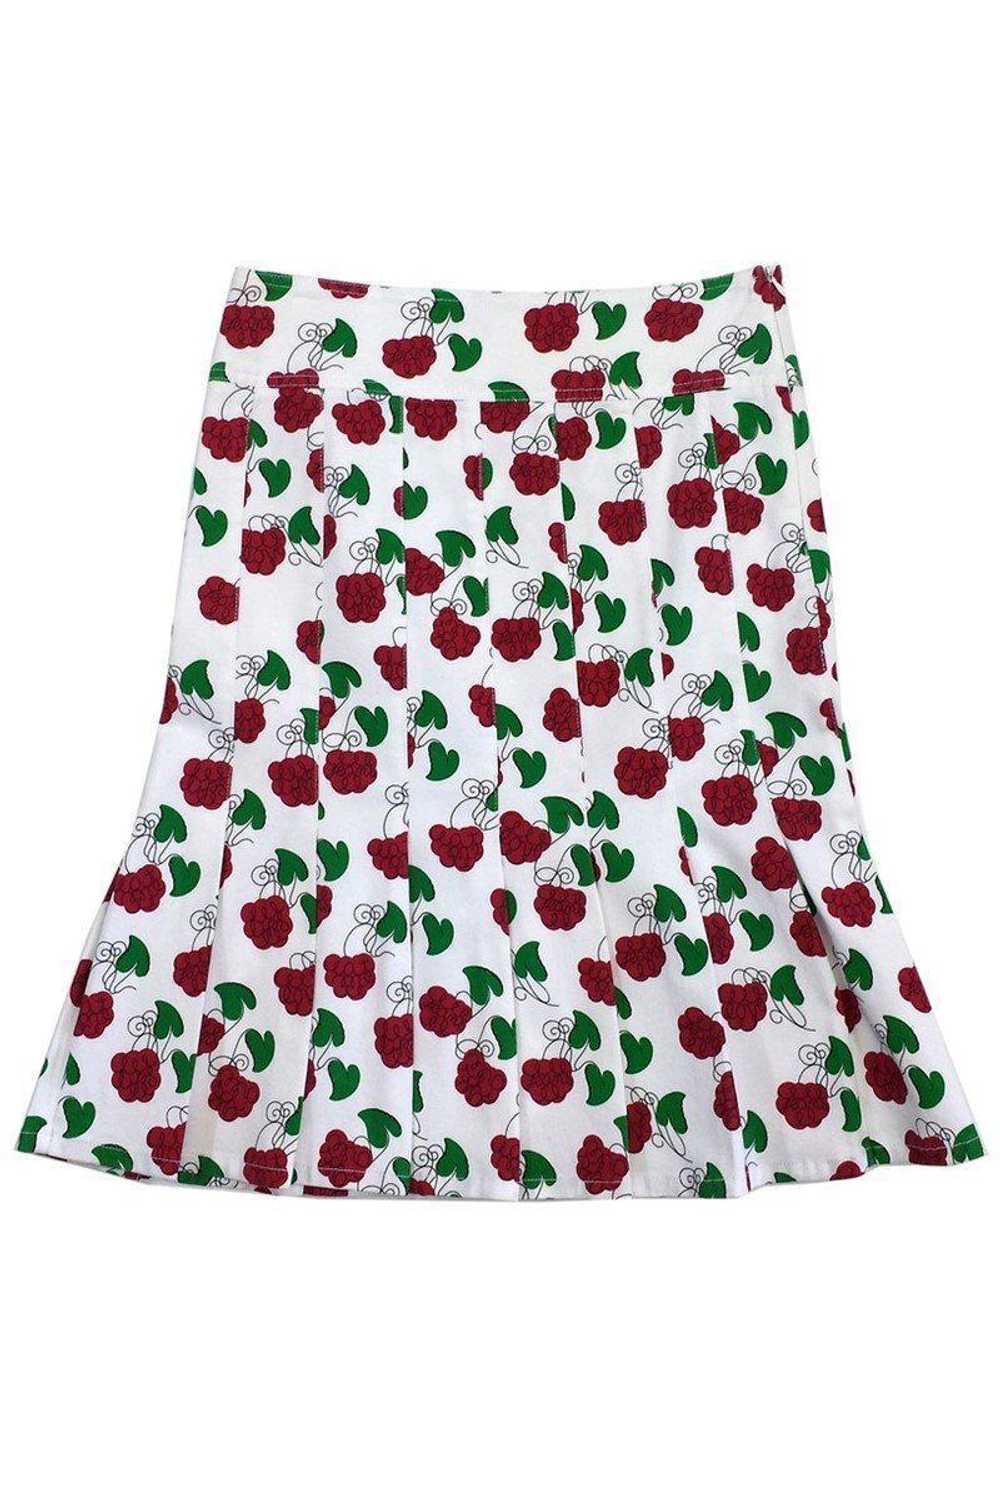 Moschino - White Red & Green Fruit Print Cotton S… - image 1